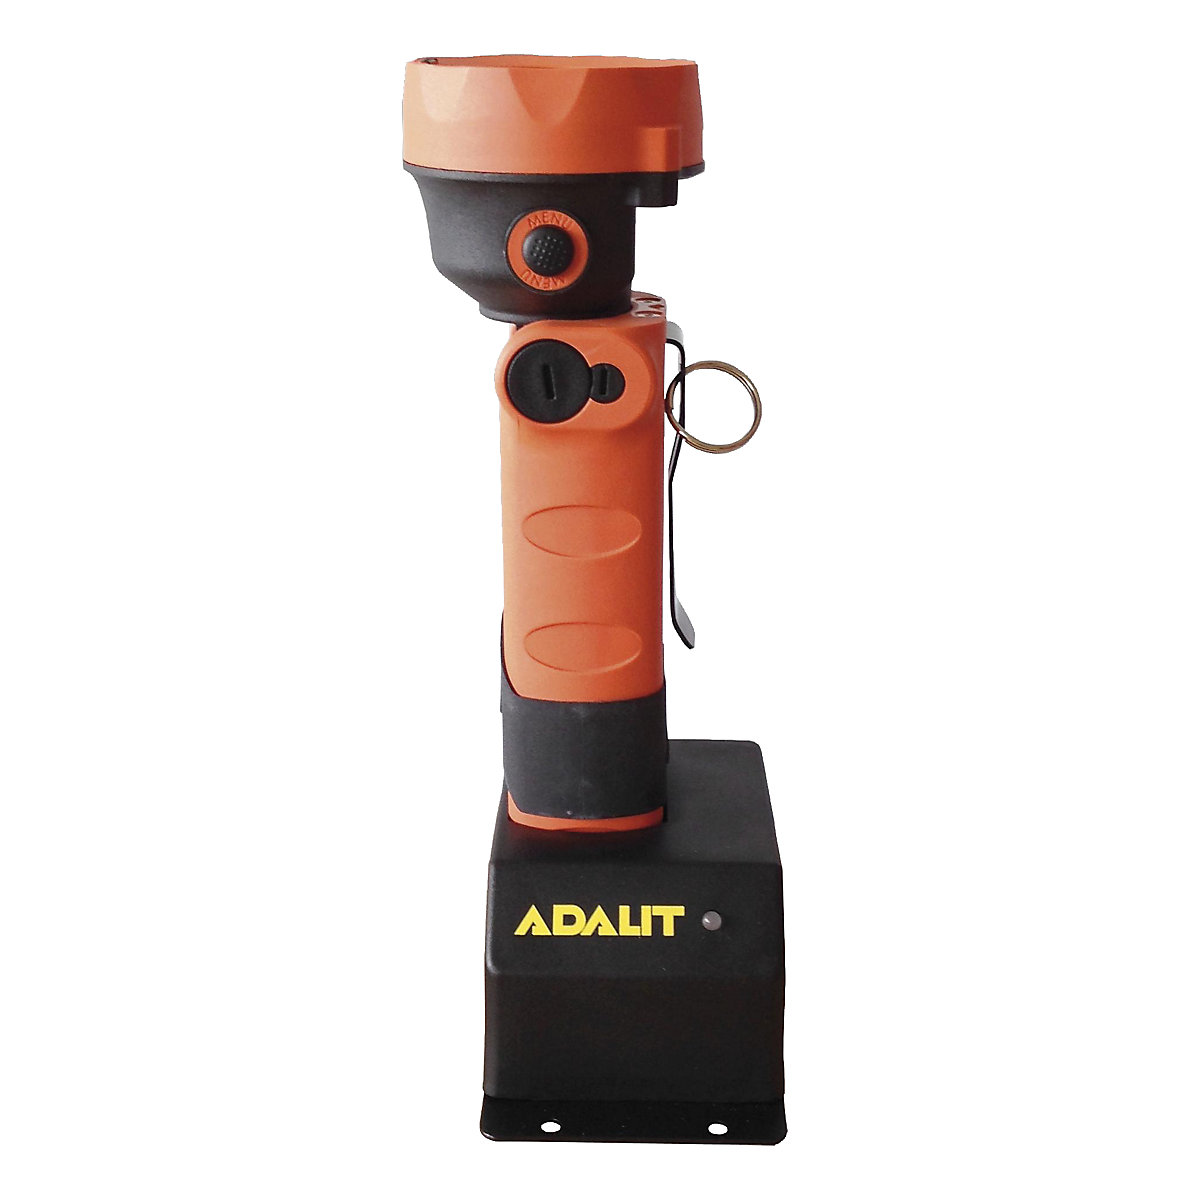 Charger for ADALIT® torches (Product illustration 3)-2